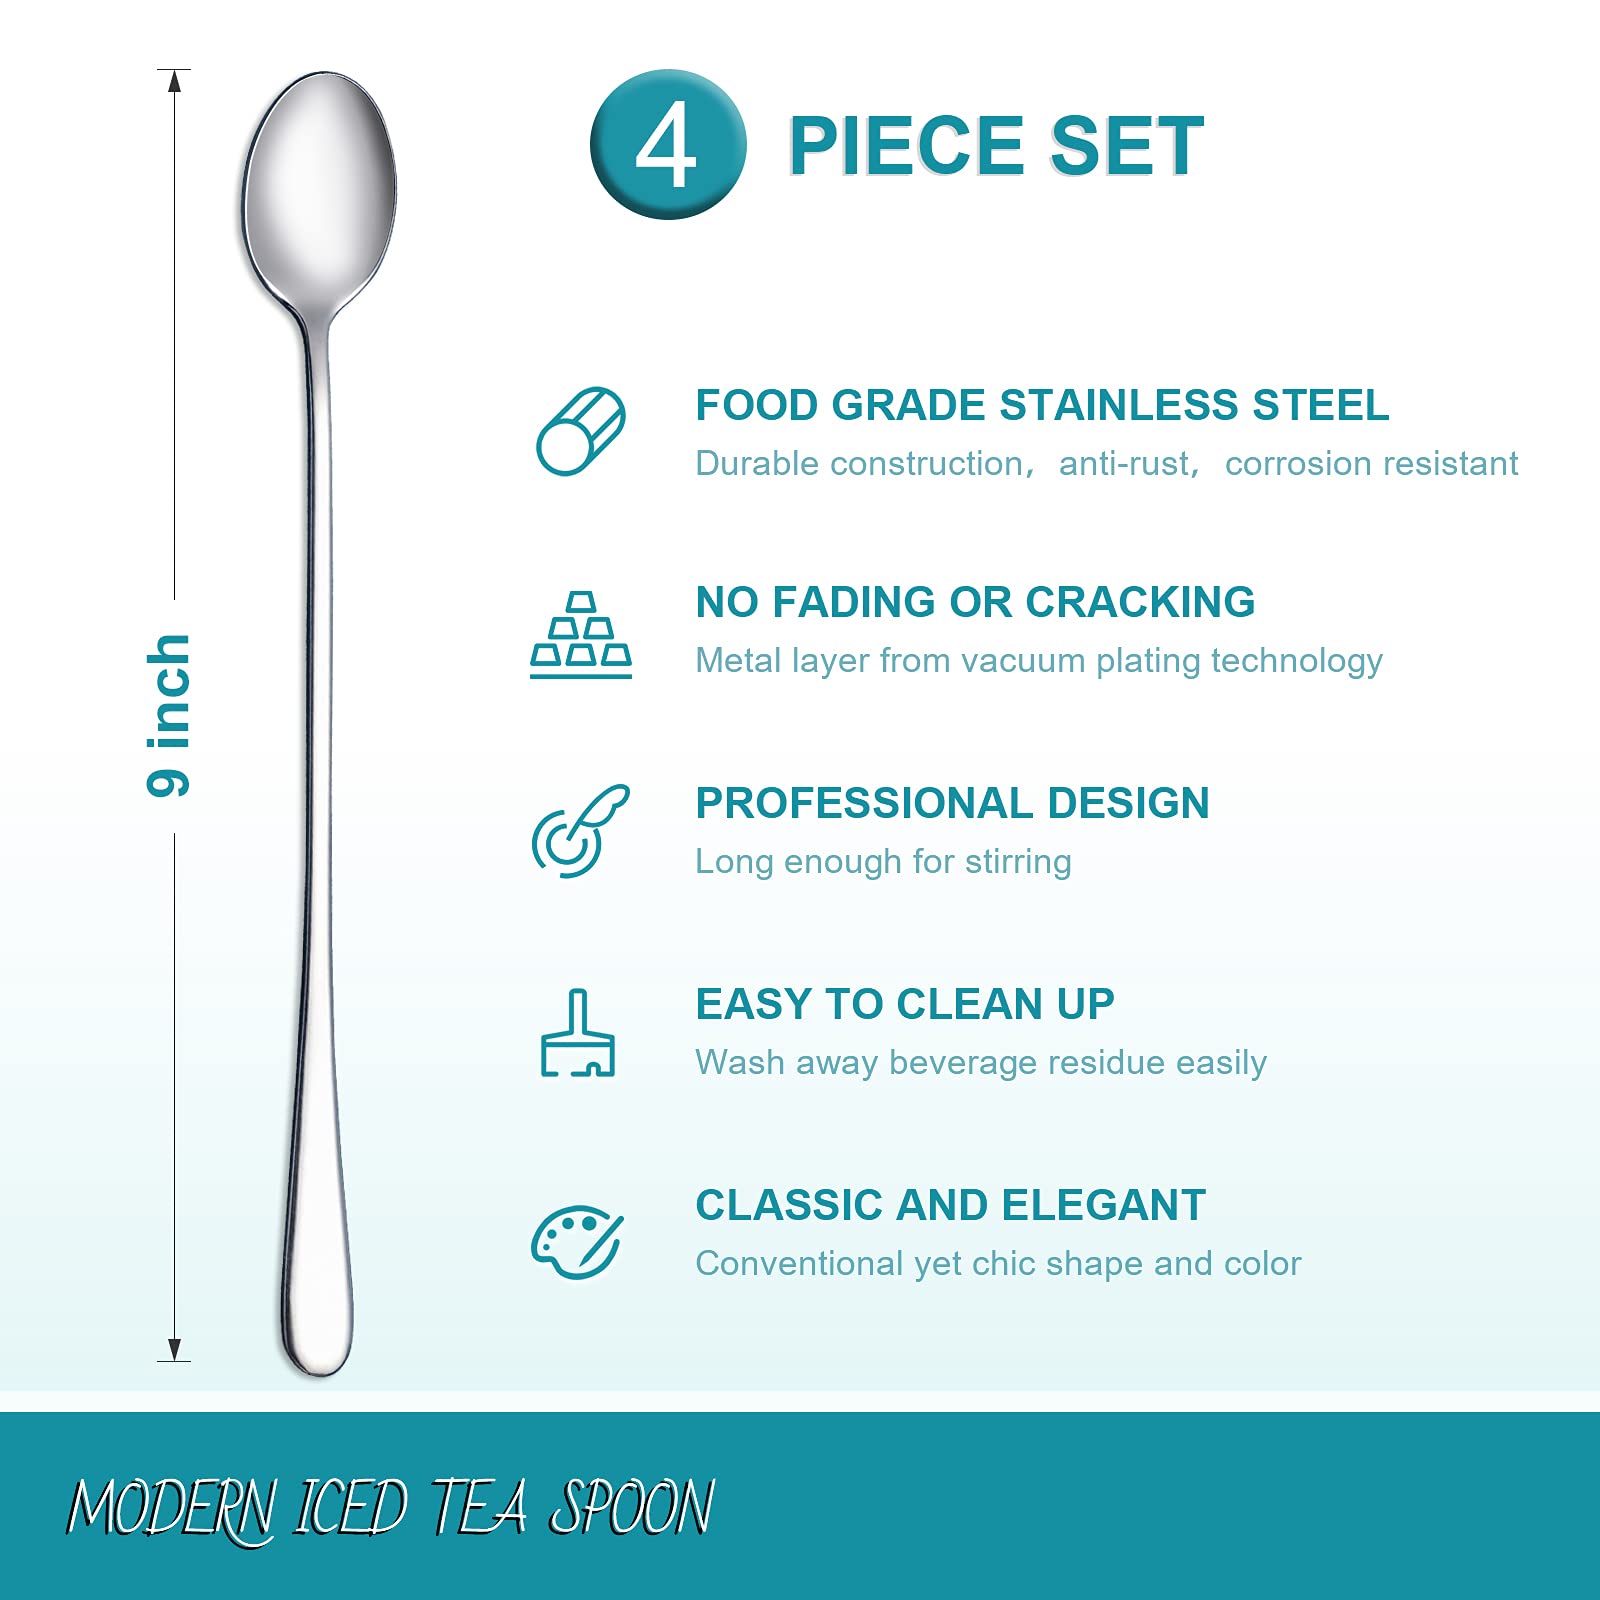 Hiware 9-Inch Long Handle Iced Tea Spoon, Coffee Spoon, Ice Cream Spoon, Stainless Steel Cocktail Stirring Spoons, Set of 4